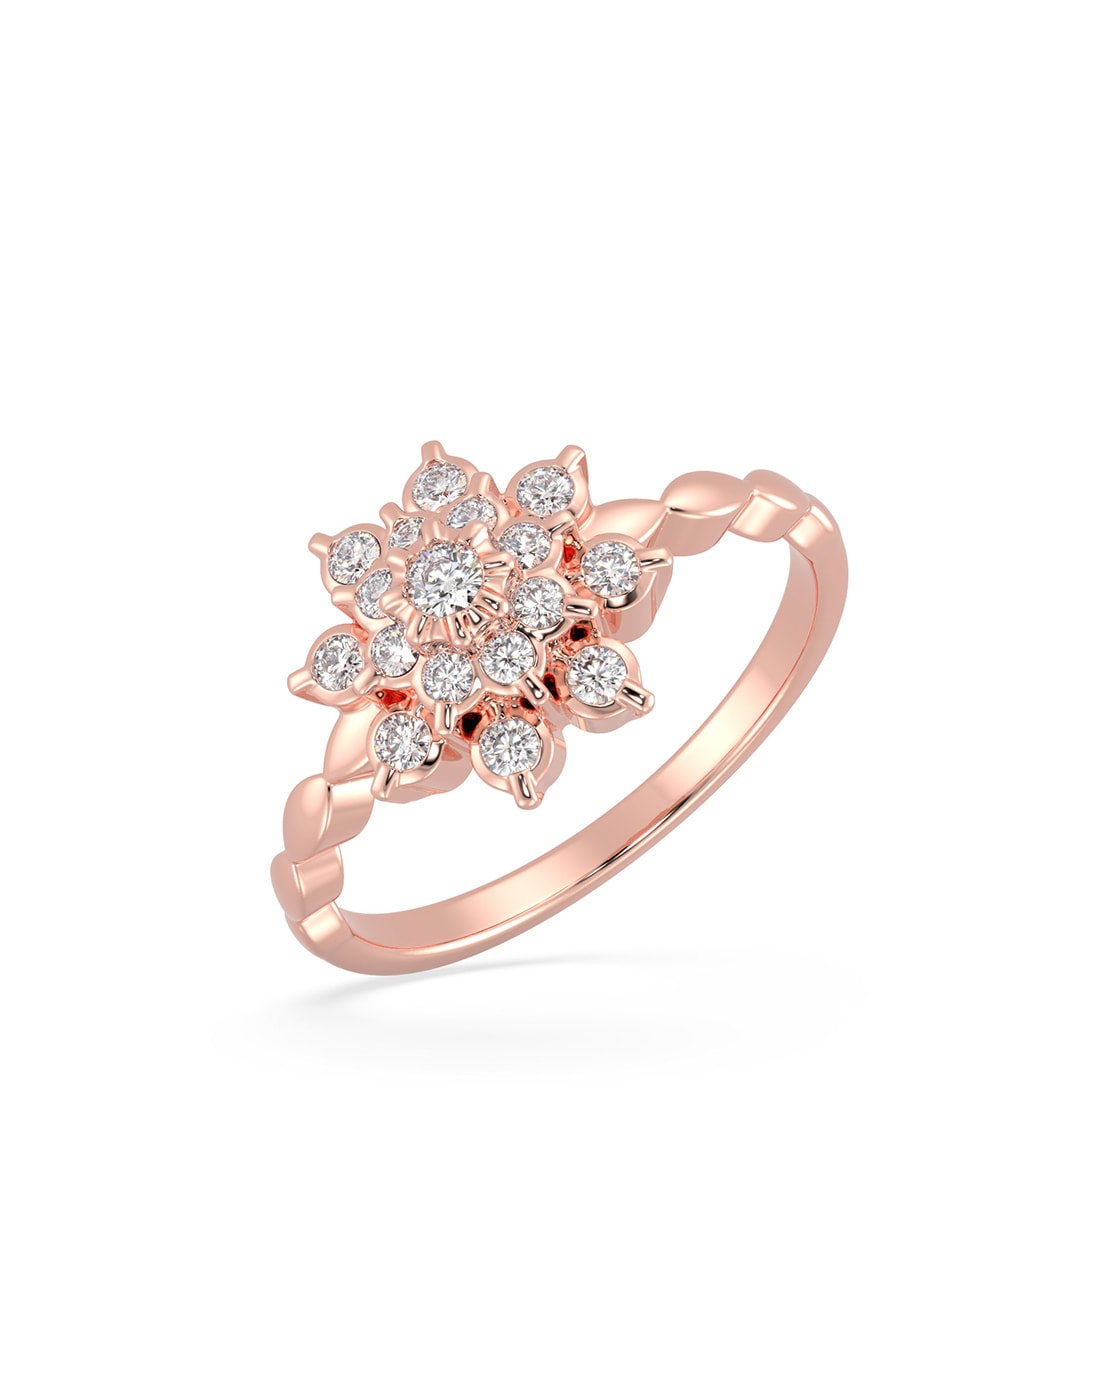 Buy 18Kt Rose Gold Solitaire Diamond Ring 148VU5427 Online from Vaibhav  Jewellers